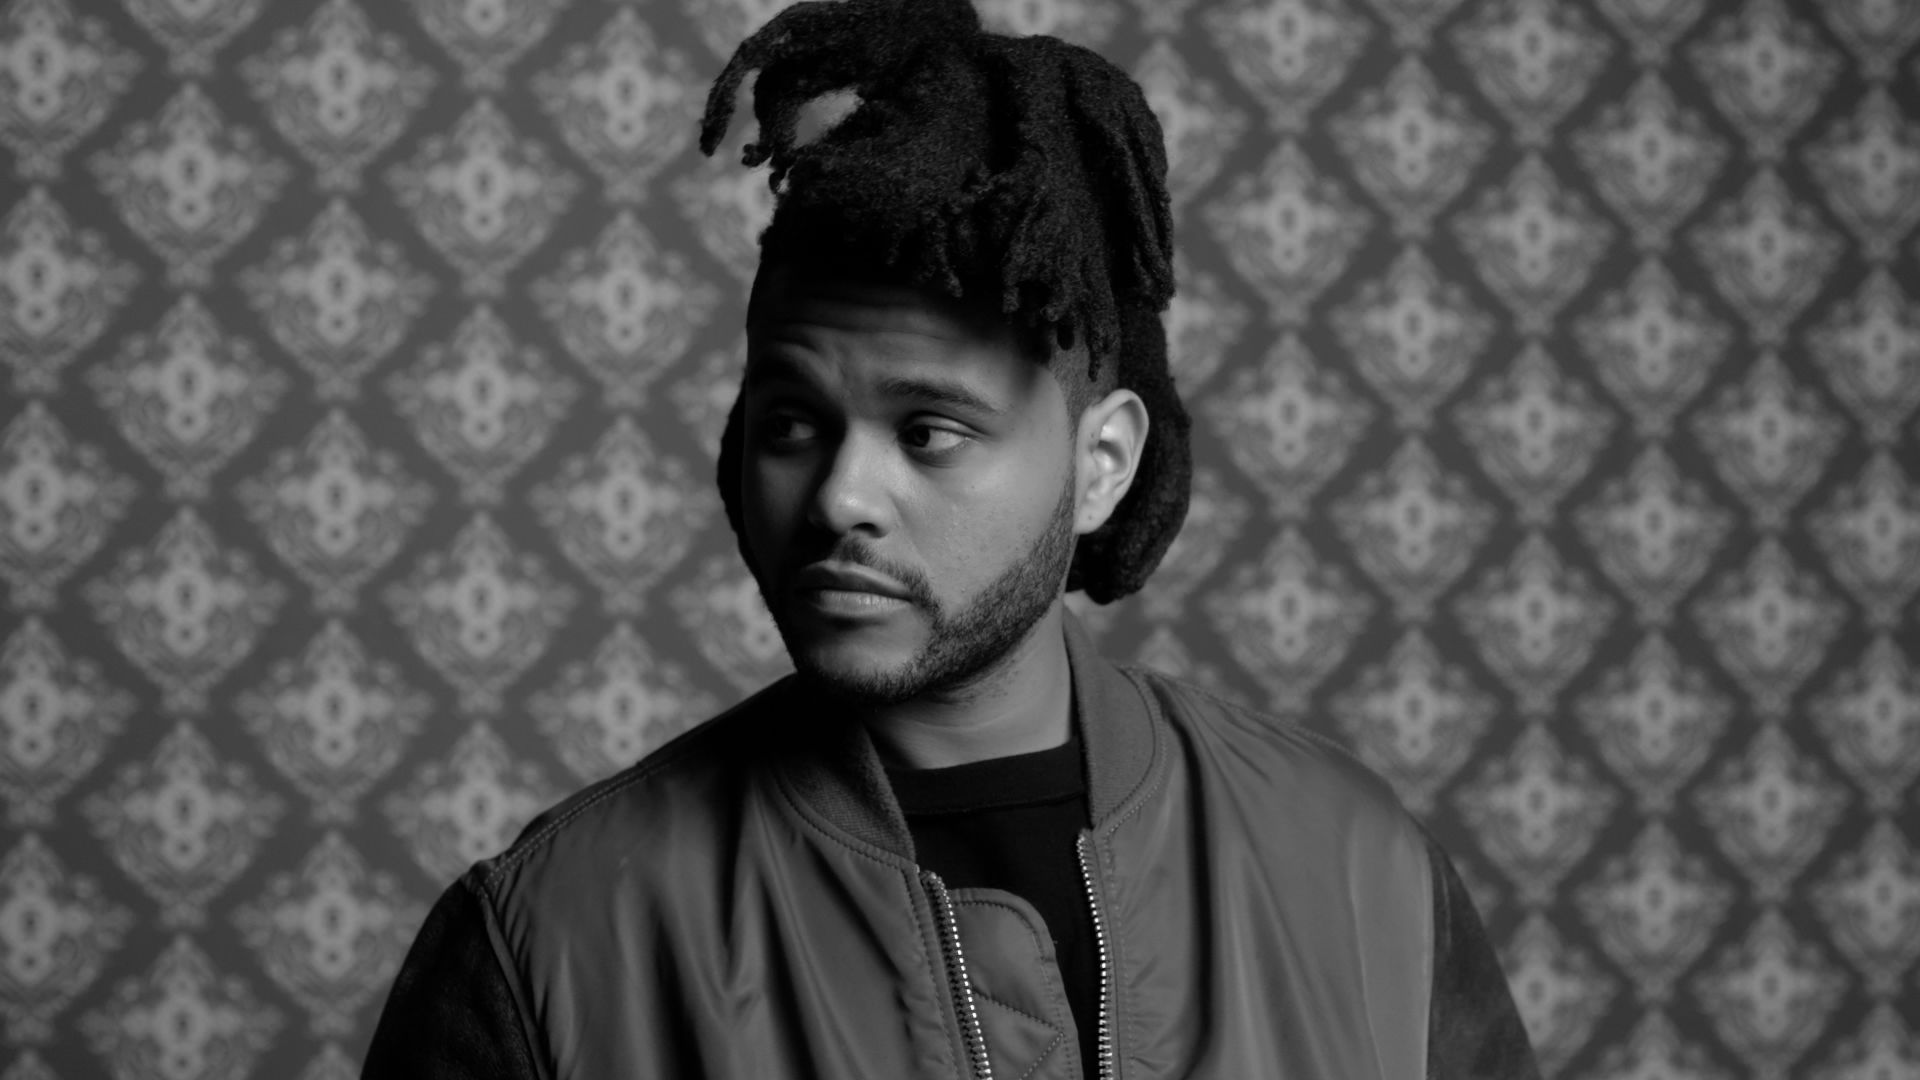 Live for the weekend. The Weeknd. Weekend. Еру цшсутв.